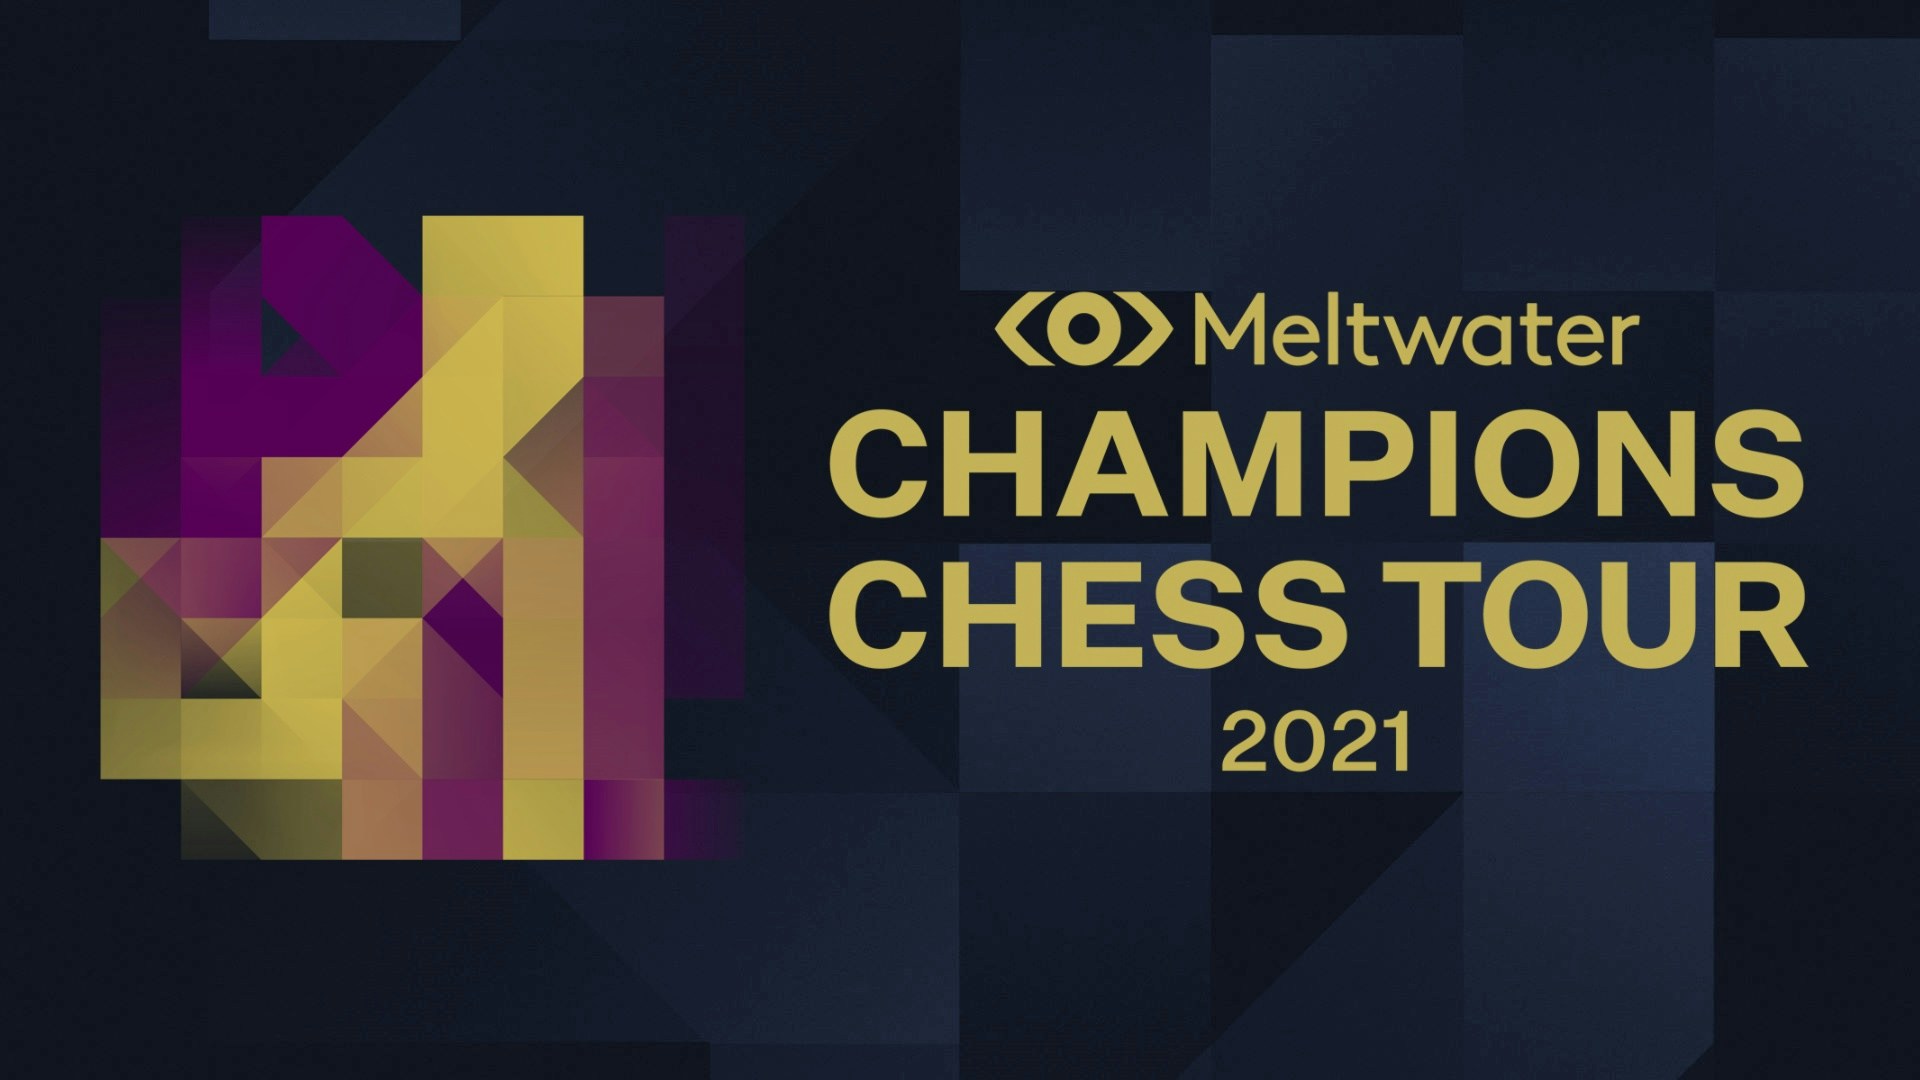 Meltwater Chess Champions Tour 2021 Banner